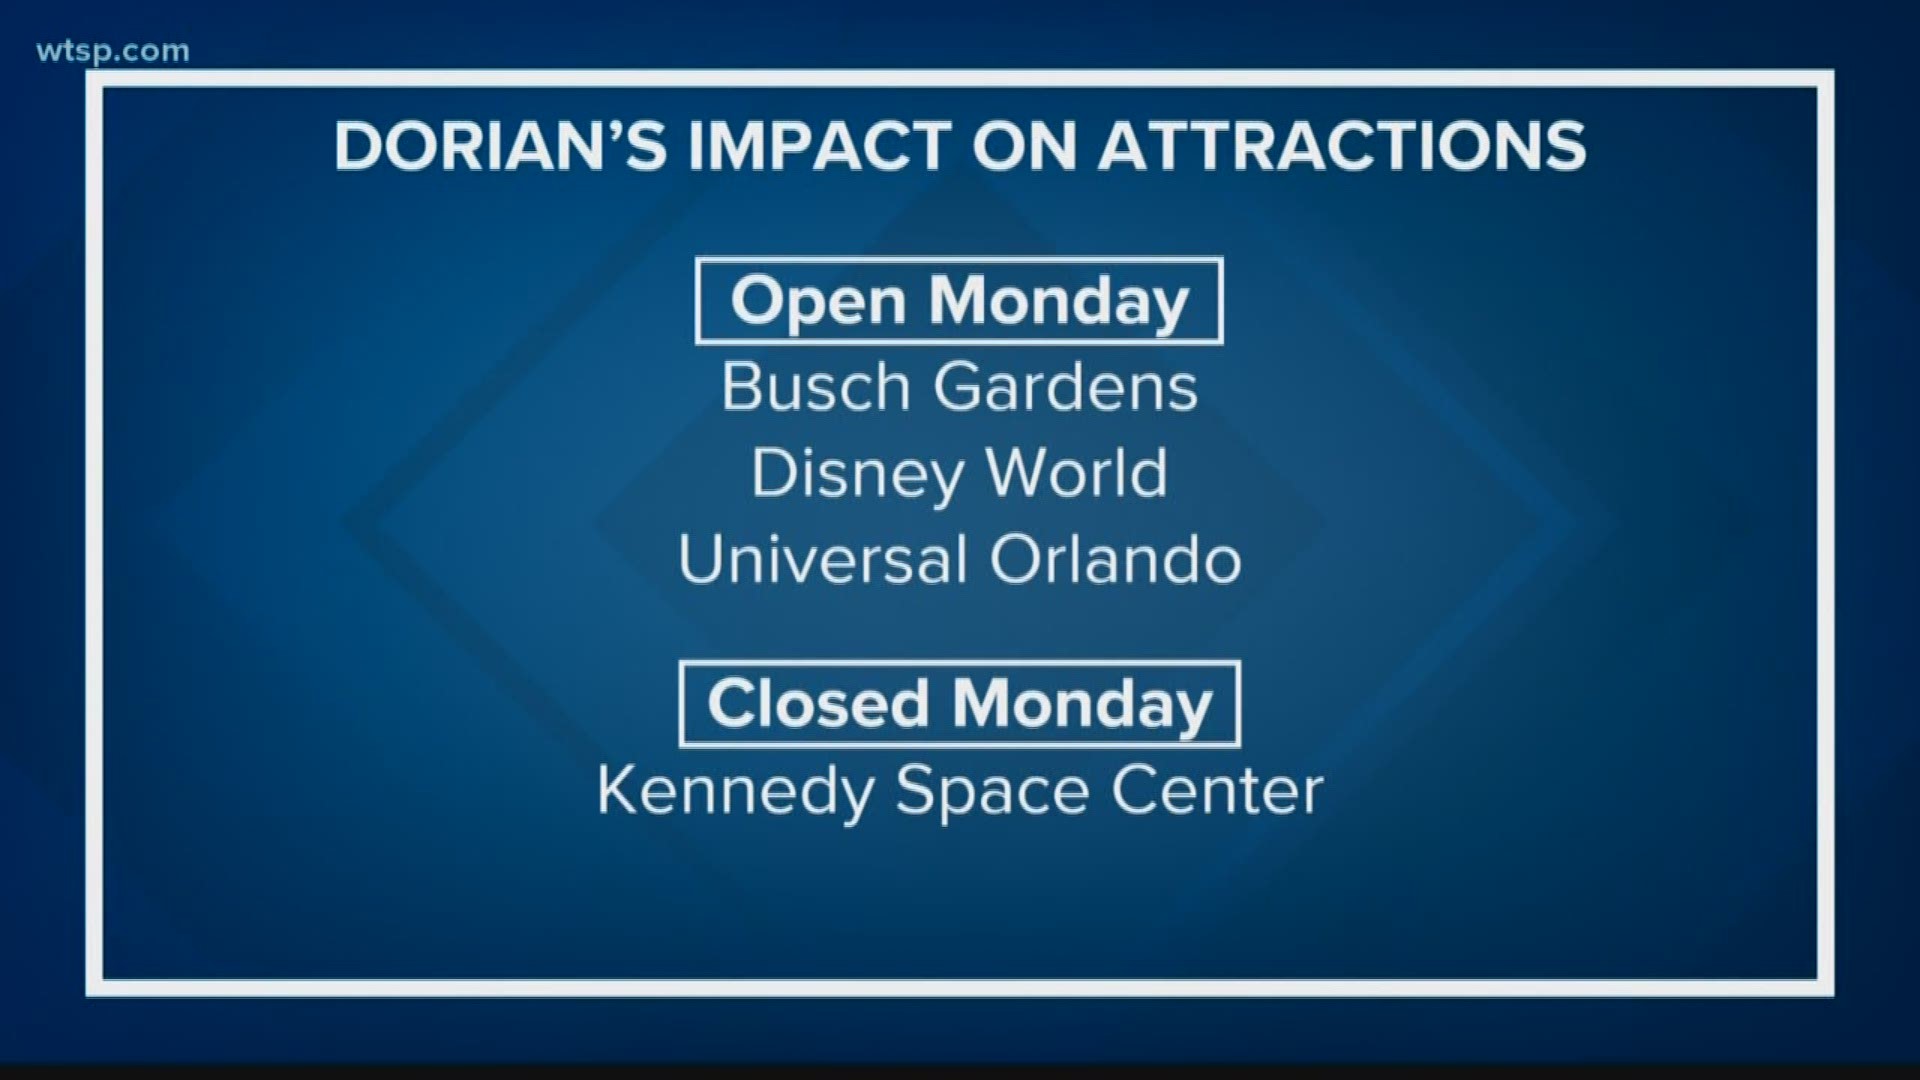 Ahead of Dorian, people want to know what airports and theme parks are closing, here's what we have as of Sunday night. Fort Lauderdale-Hollywood International Airport plans to shut down as of Monday at noon until further notice.